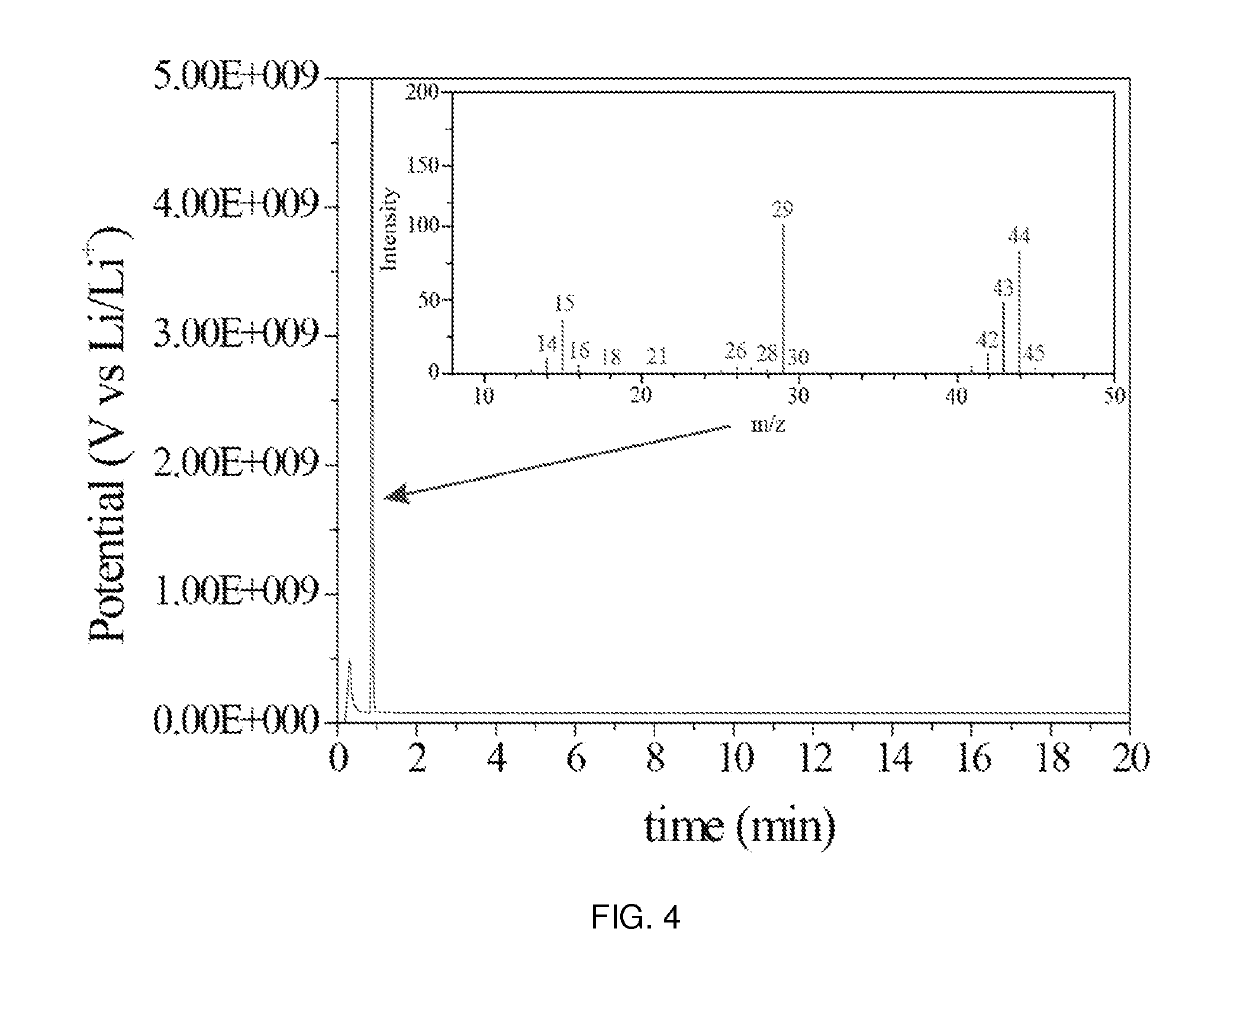 Molten carboxylate electrolytes for electrochemical decarboxylation processes